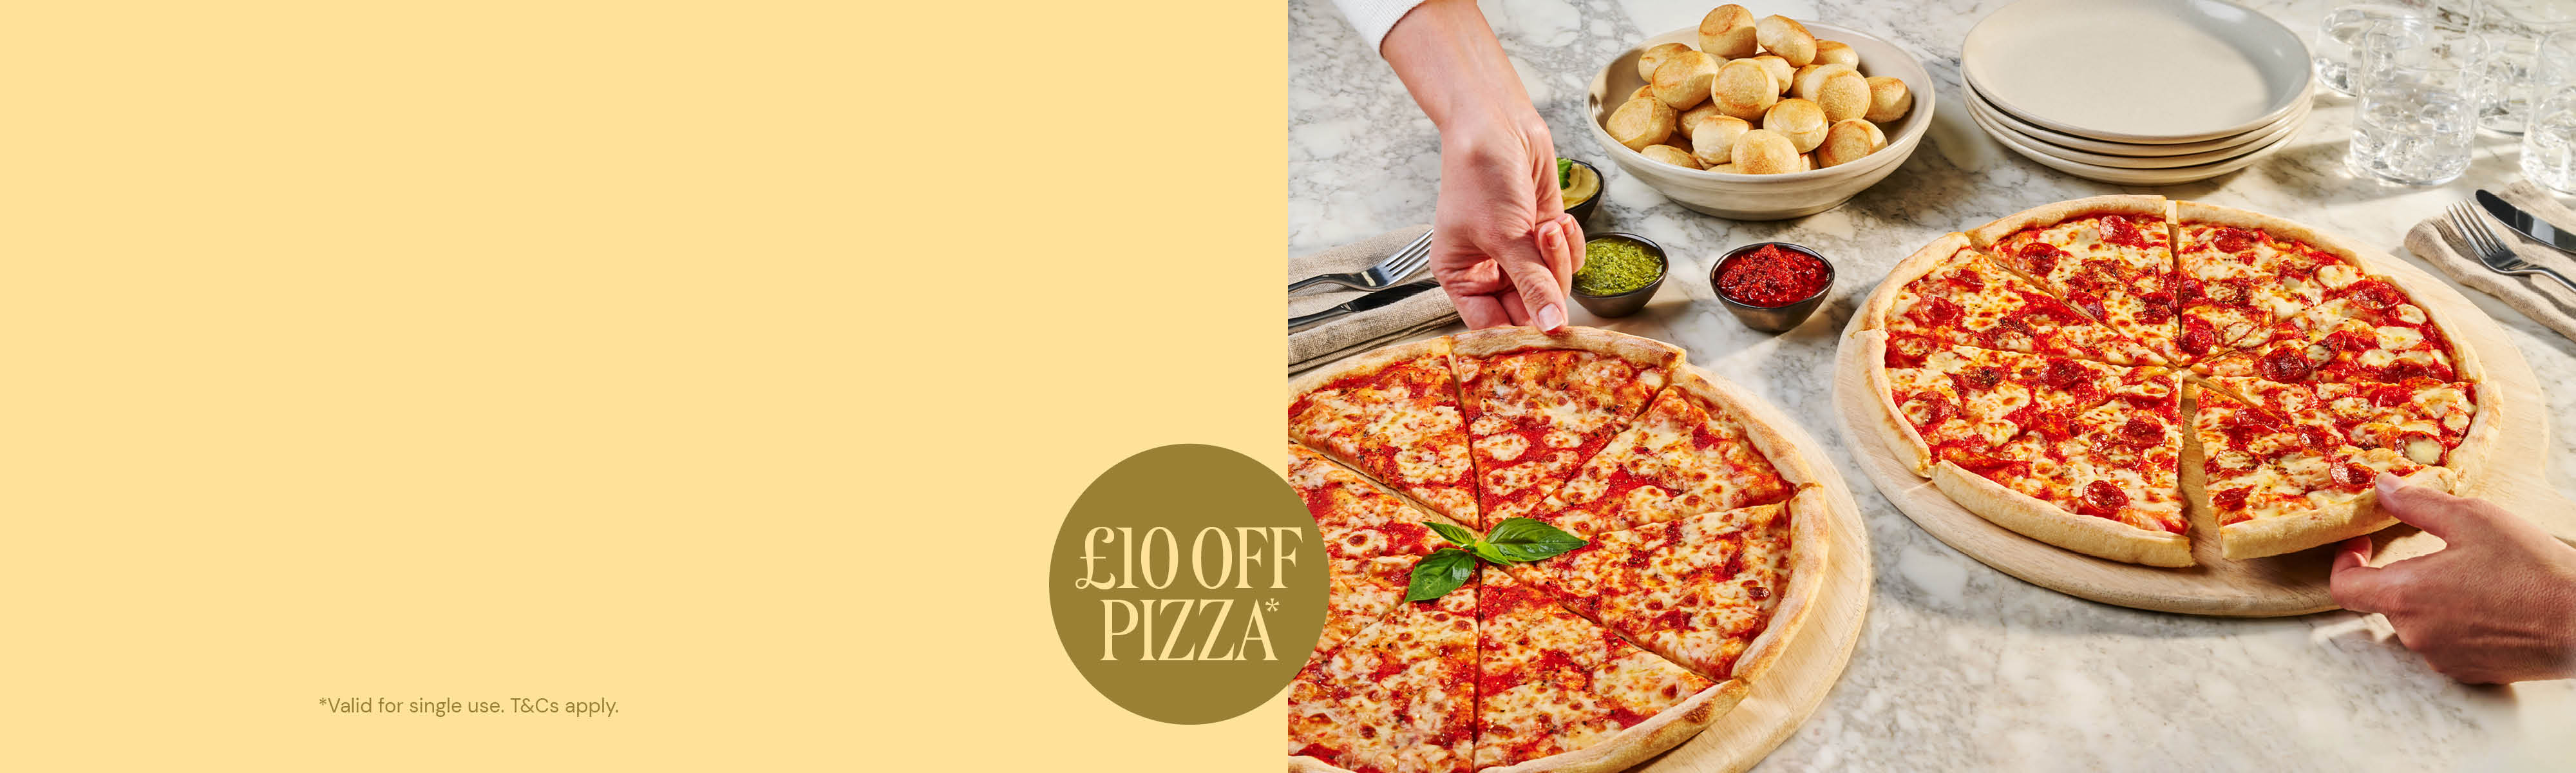 Pizza Express - Up To £10 Discount